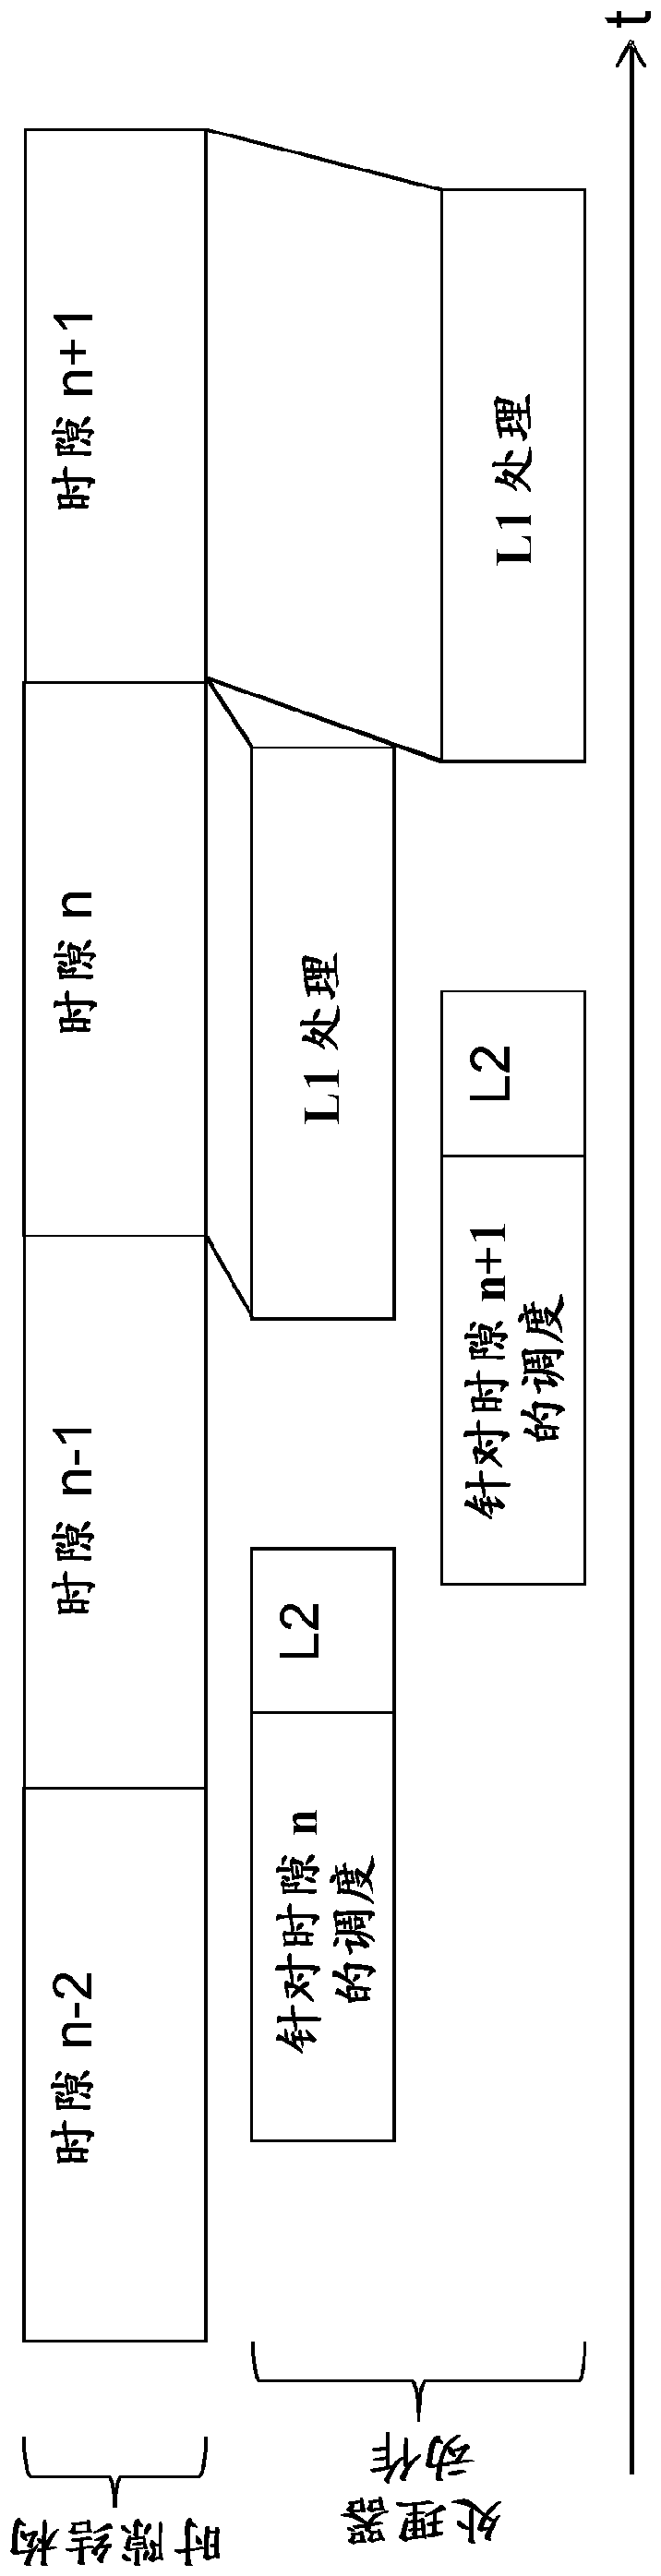 Method for scheduling sub-slots in a communication system